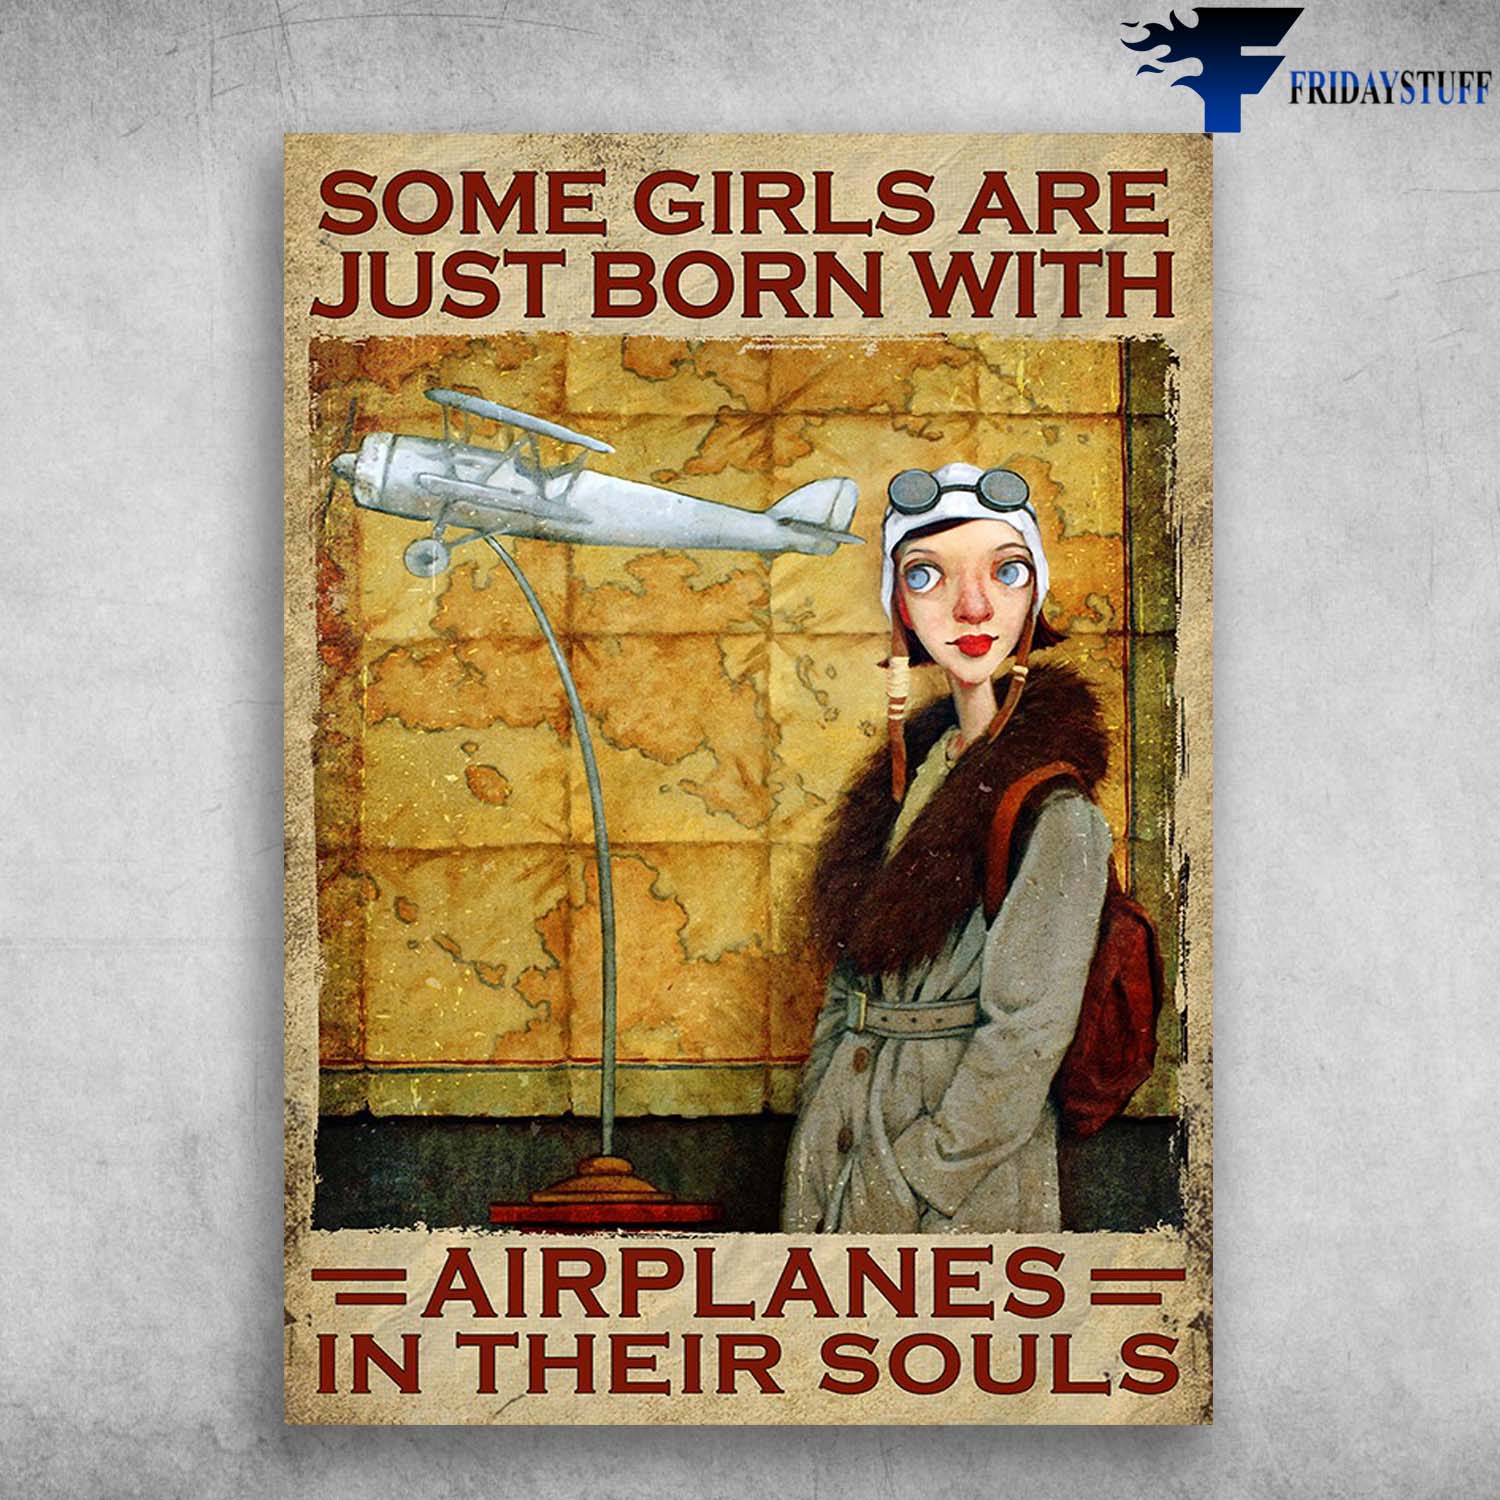 Airplanes Girl, Airplane Travel - Some Girls Are Just Born With, Airplanes In Their Souls